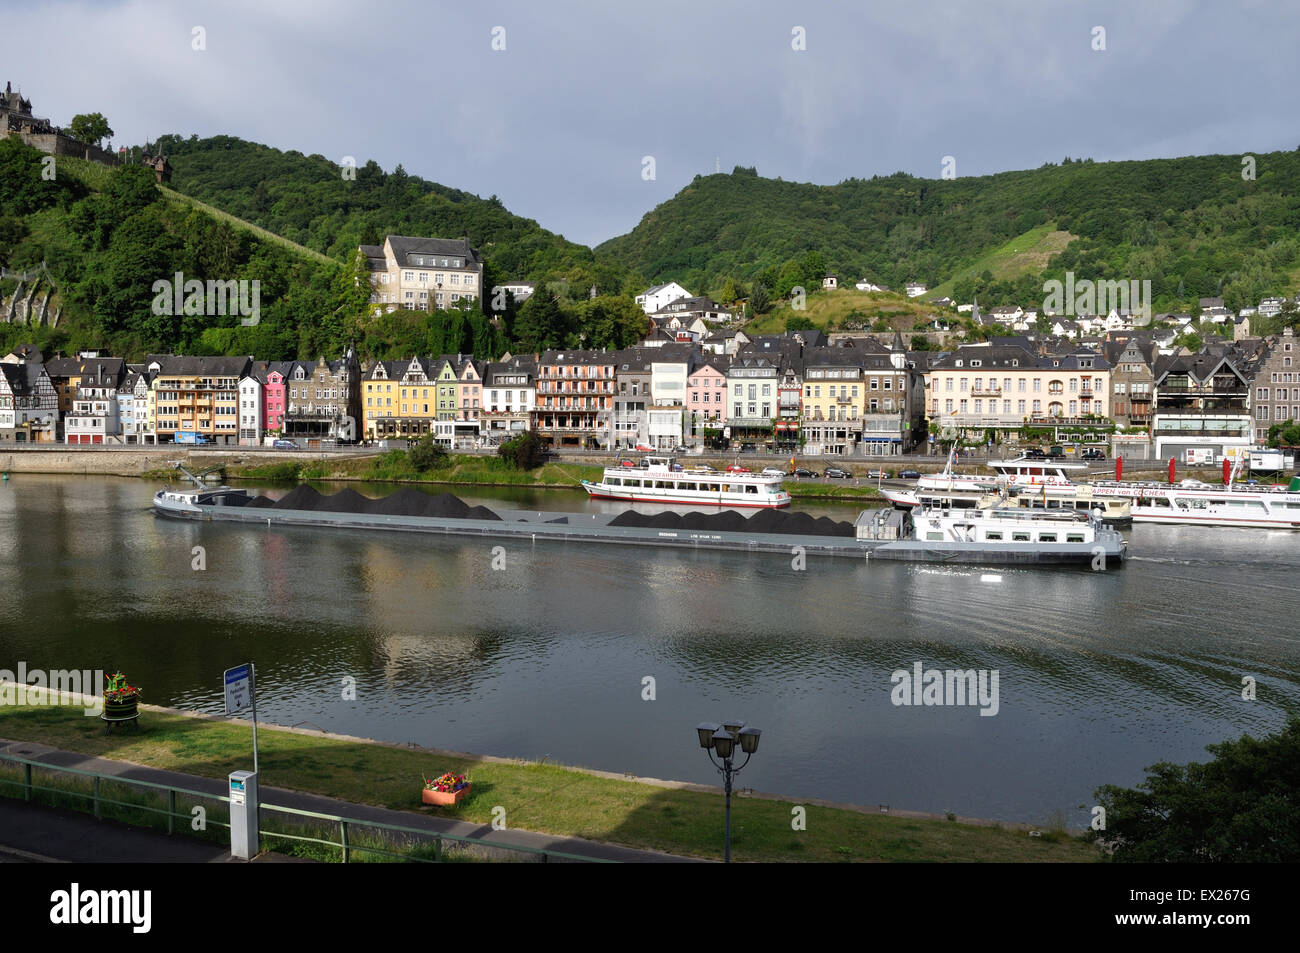 Cargo barge Graciosa, registered in Antwerp, Belgium, travels up the River Moselle at Cochem, Germany, laden with coal. Stock Photo